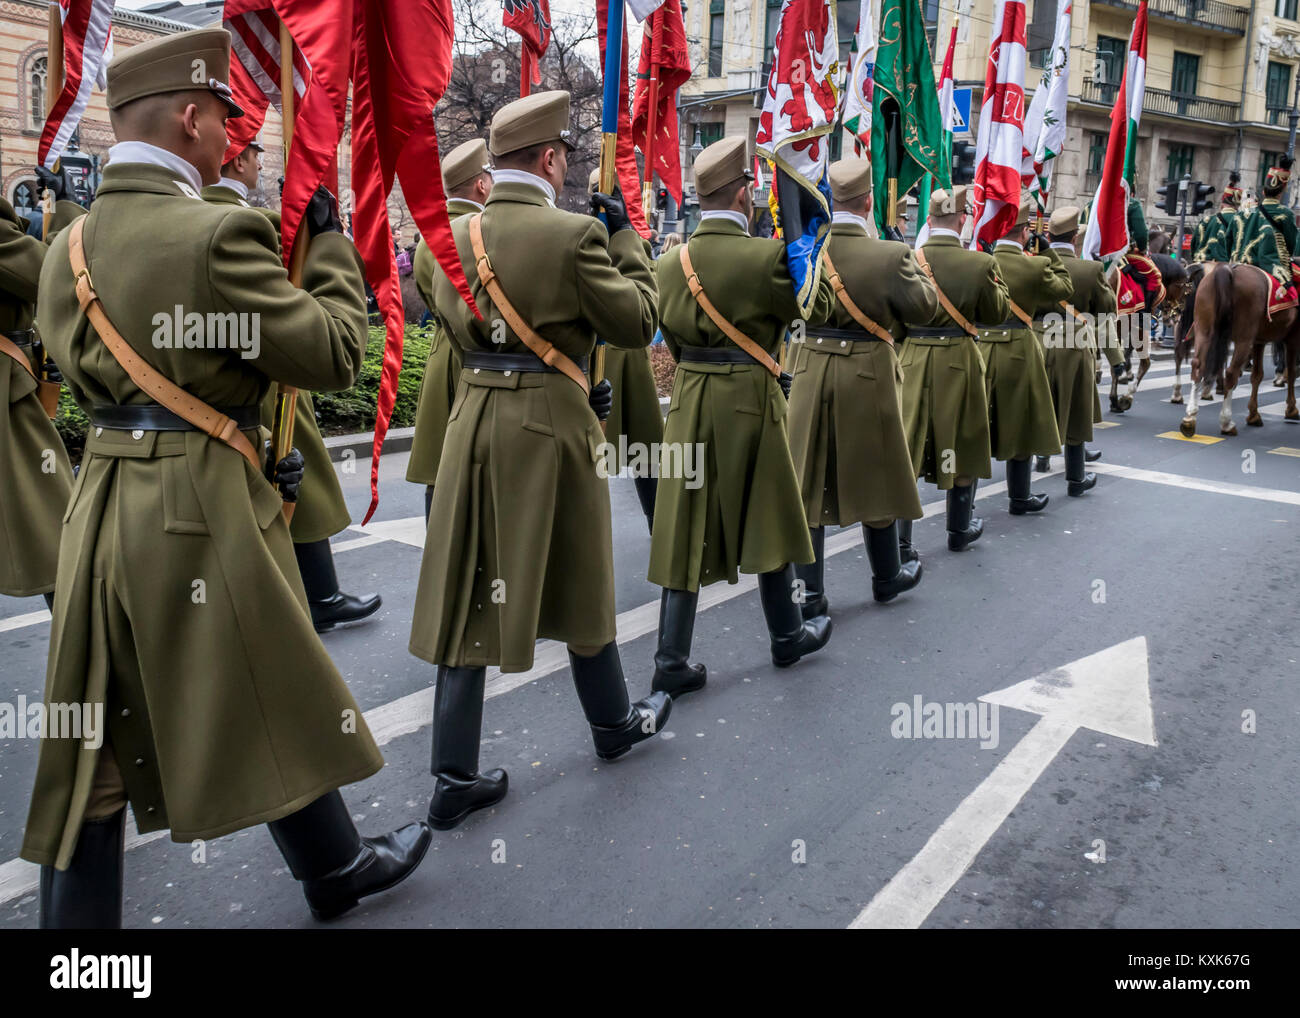 Procession of Hussars on horses and soldiers marching during the 15 March parade in Budapest, Hungary. Military parade on Hungarian National Holiday. Stock Photo